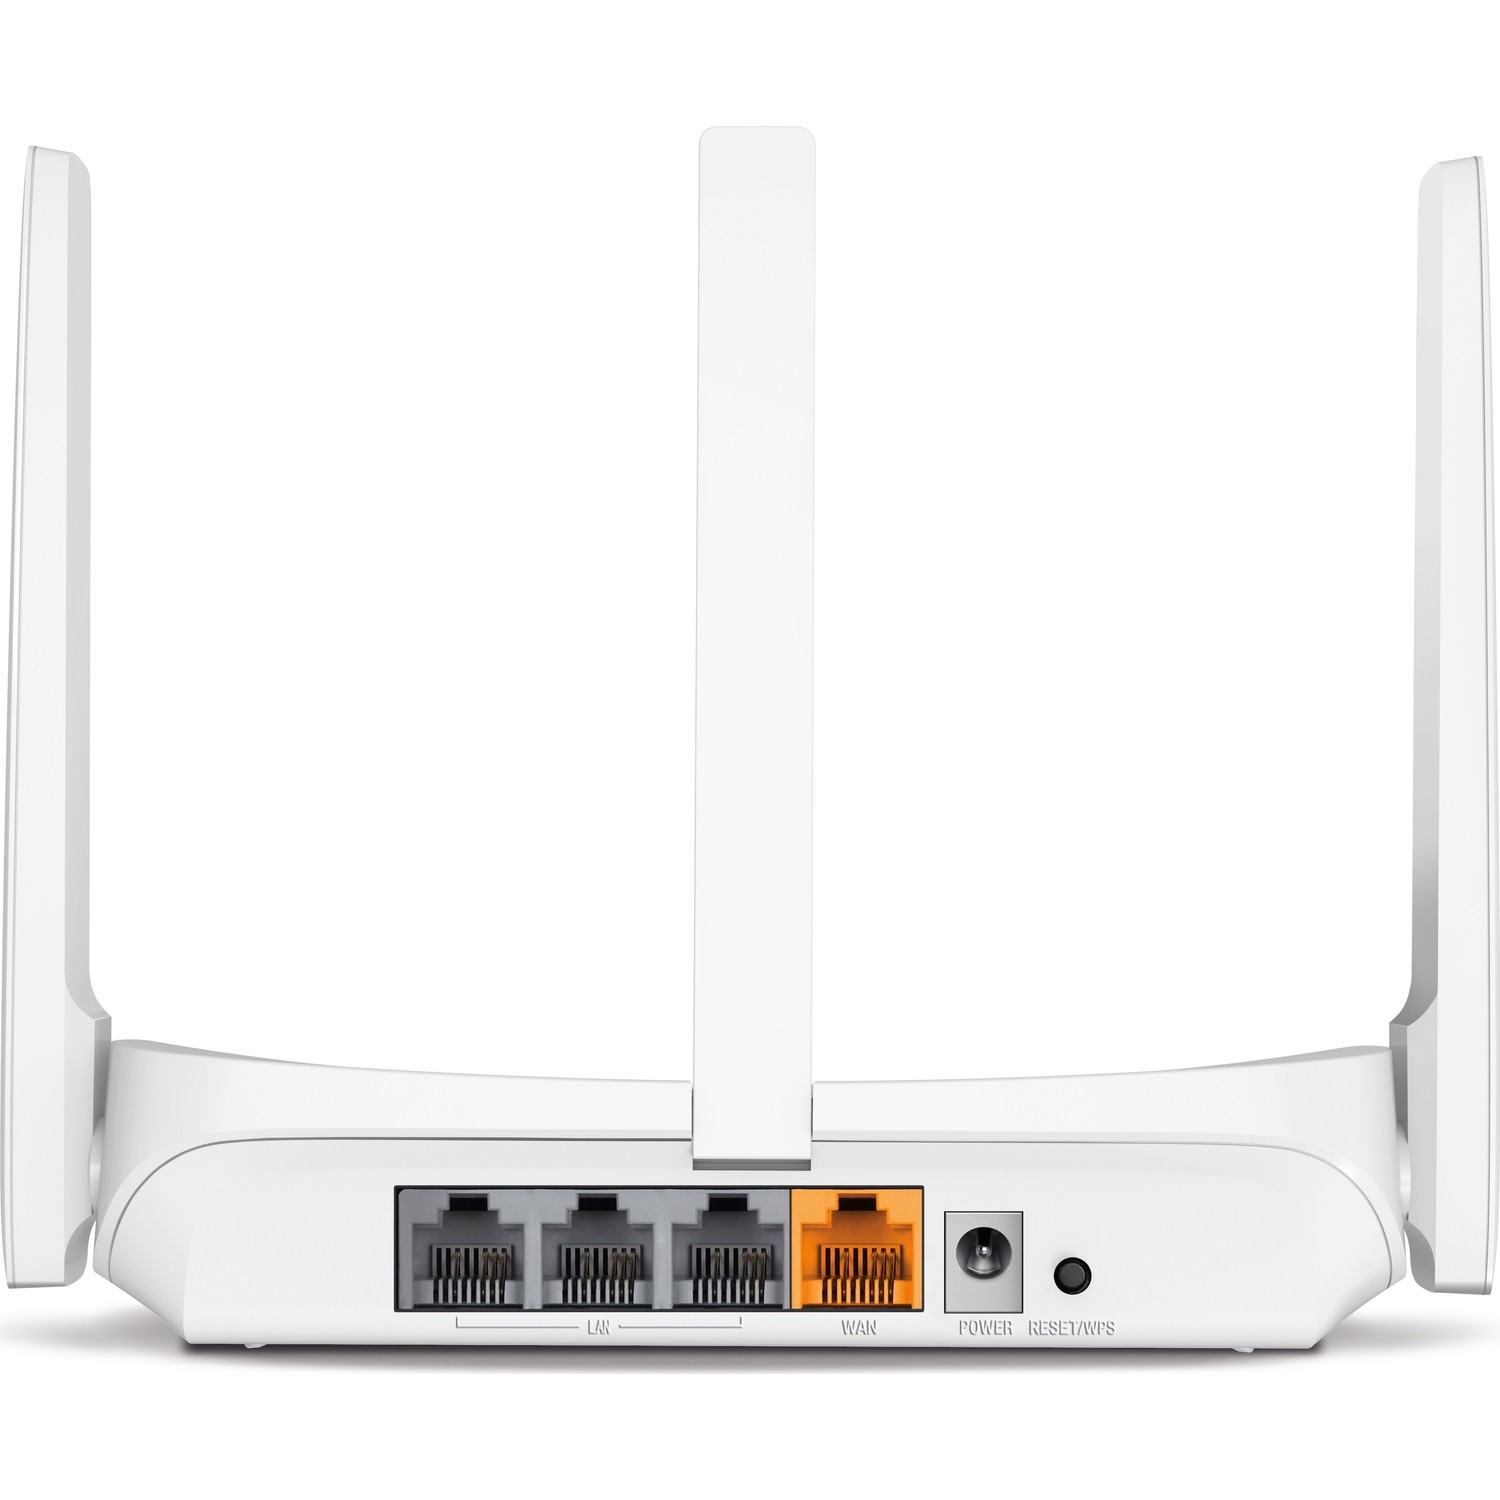 TP-LINK%20MERCUSYS%20MW305R%20300MBPS%204PORT%203%20ANTEN%205DBI%202.4GHz%20INDOOR%20ROUTER